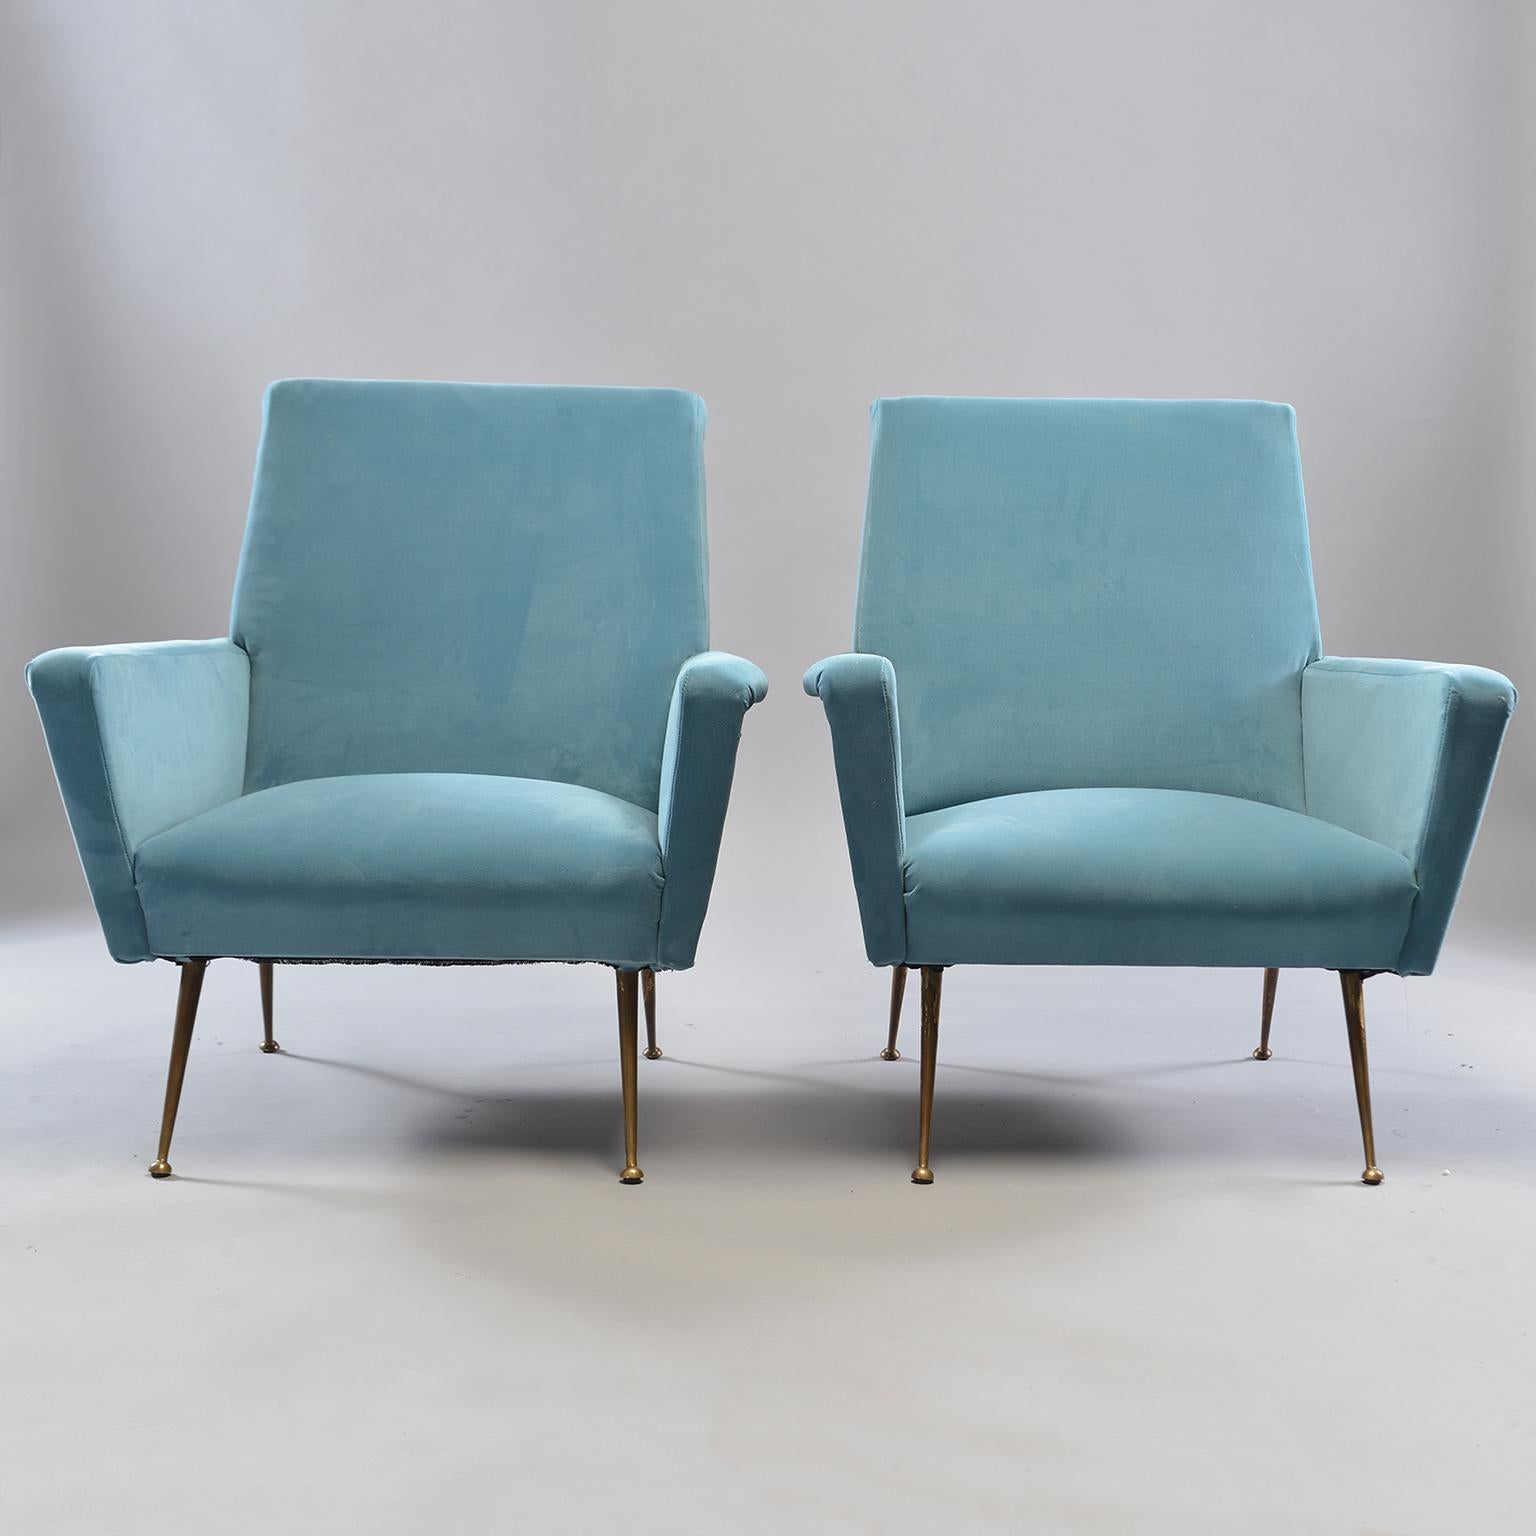 20th Century Pair of Midcentury Italian Armchairs with New Upholstery